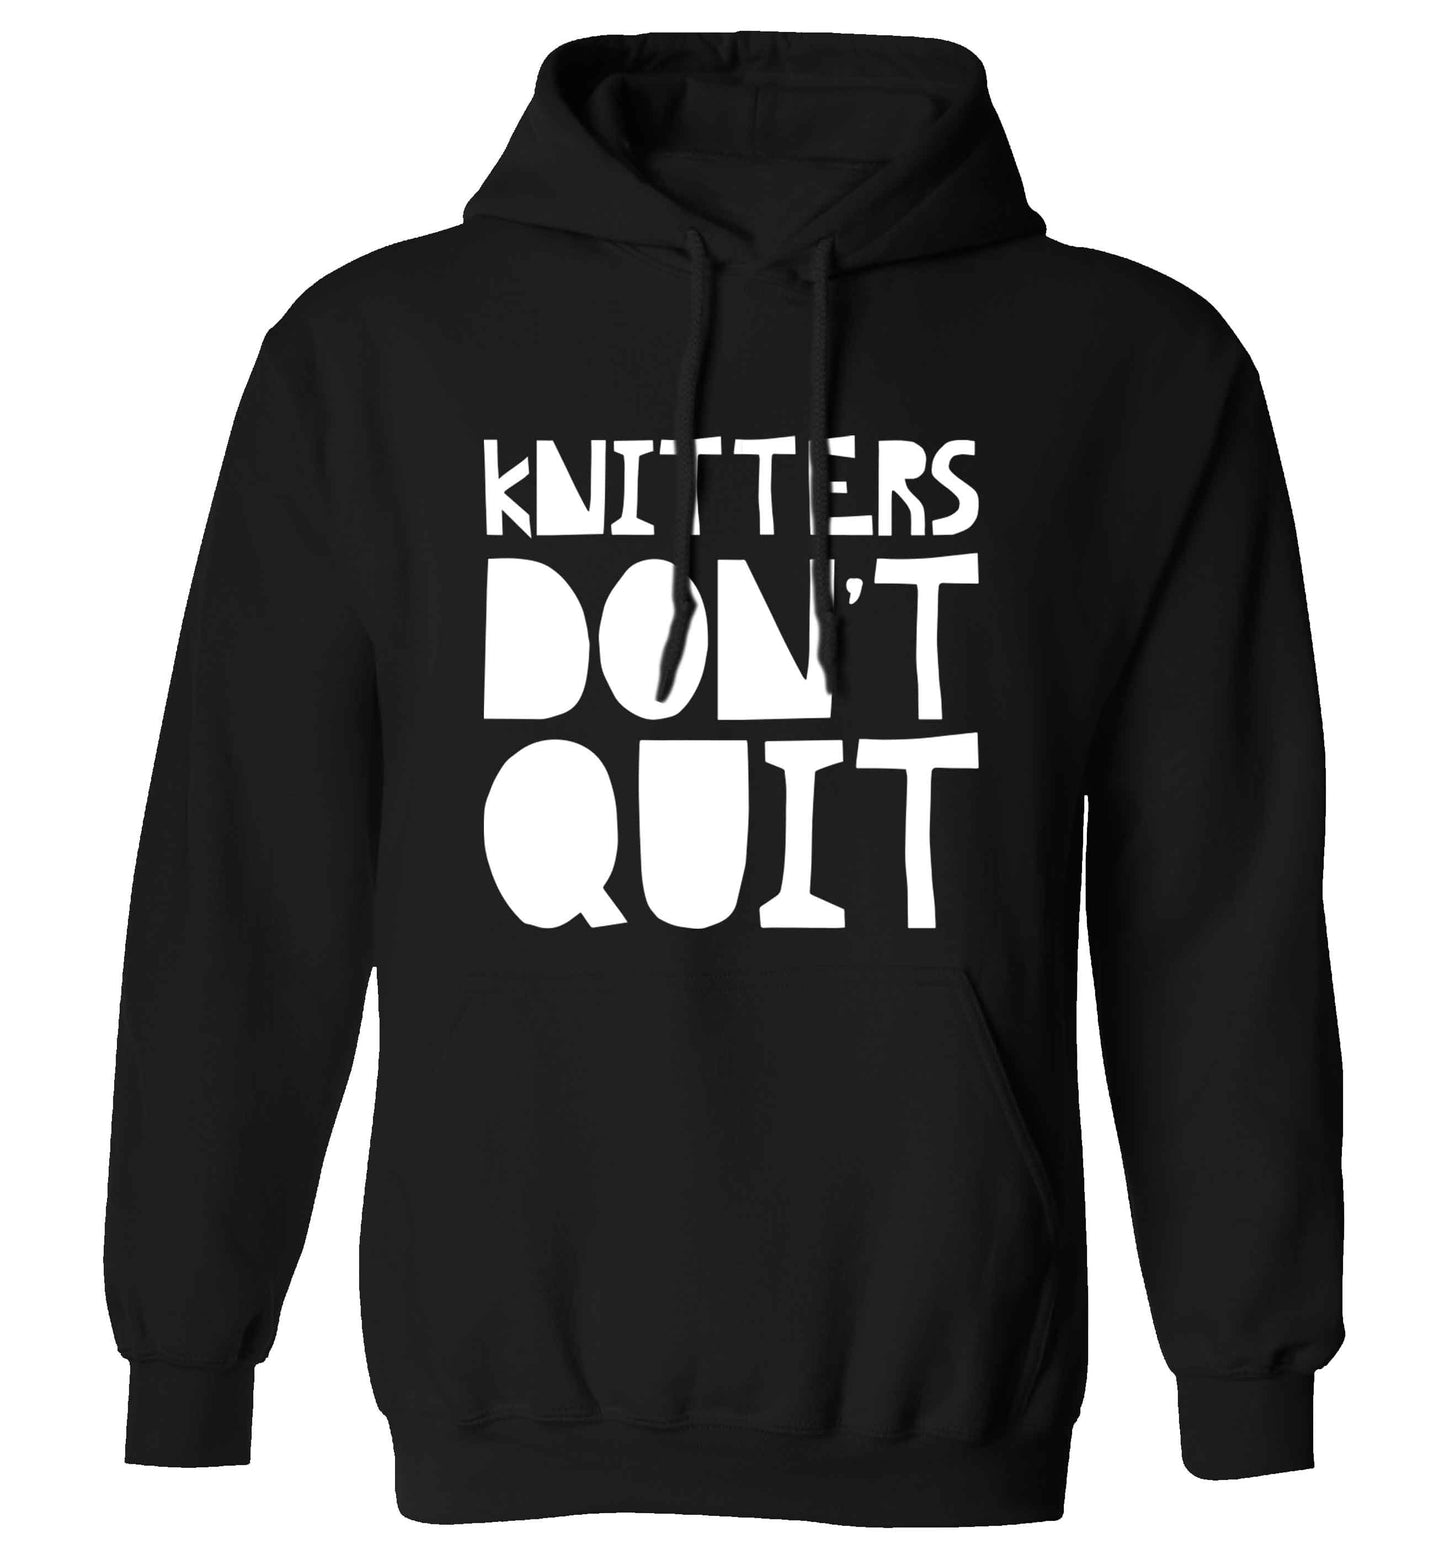 Knitters don't quit adults unisex black hoodie 2XL